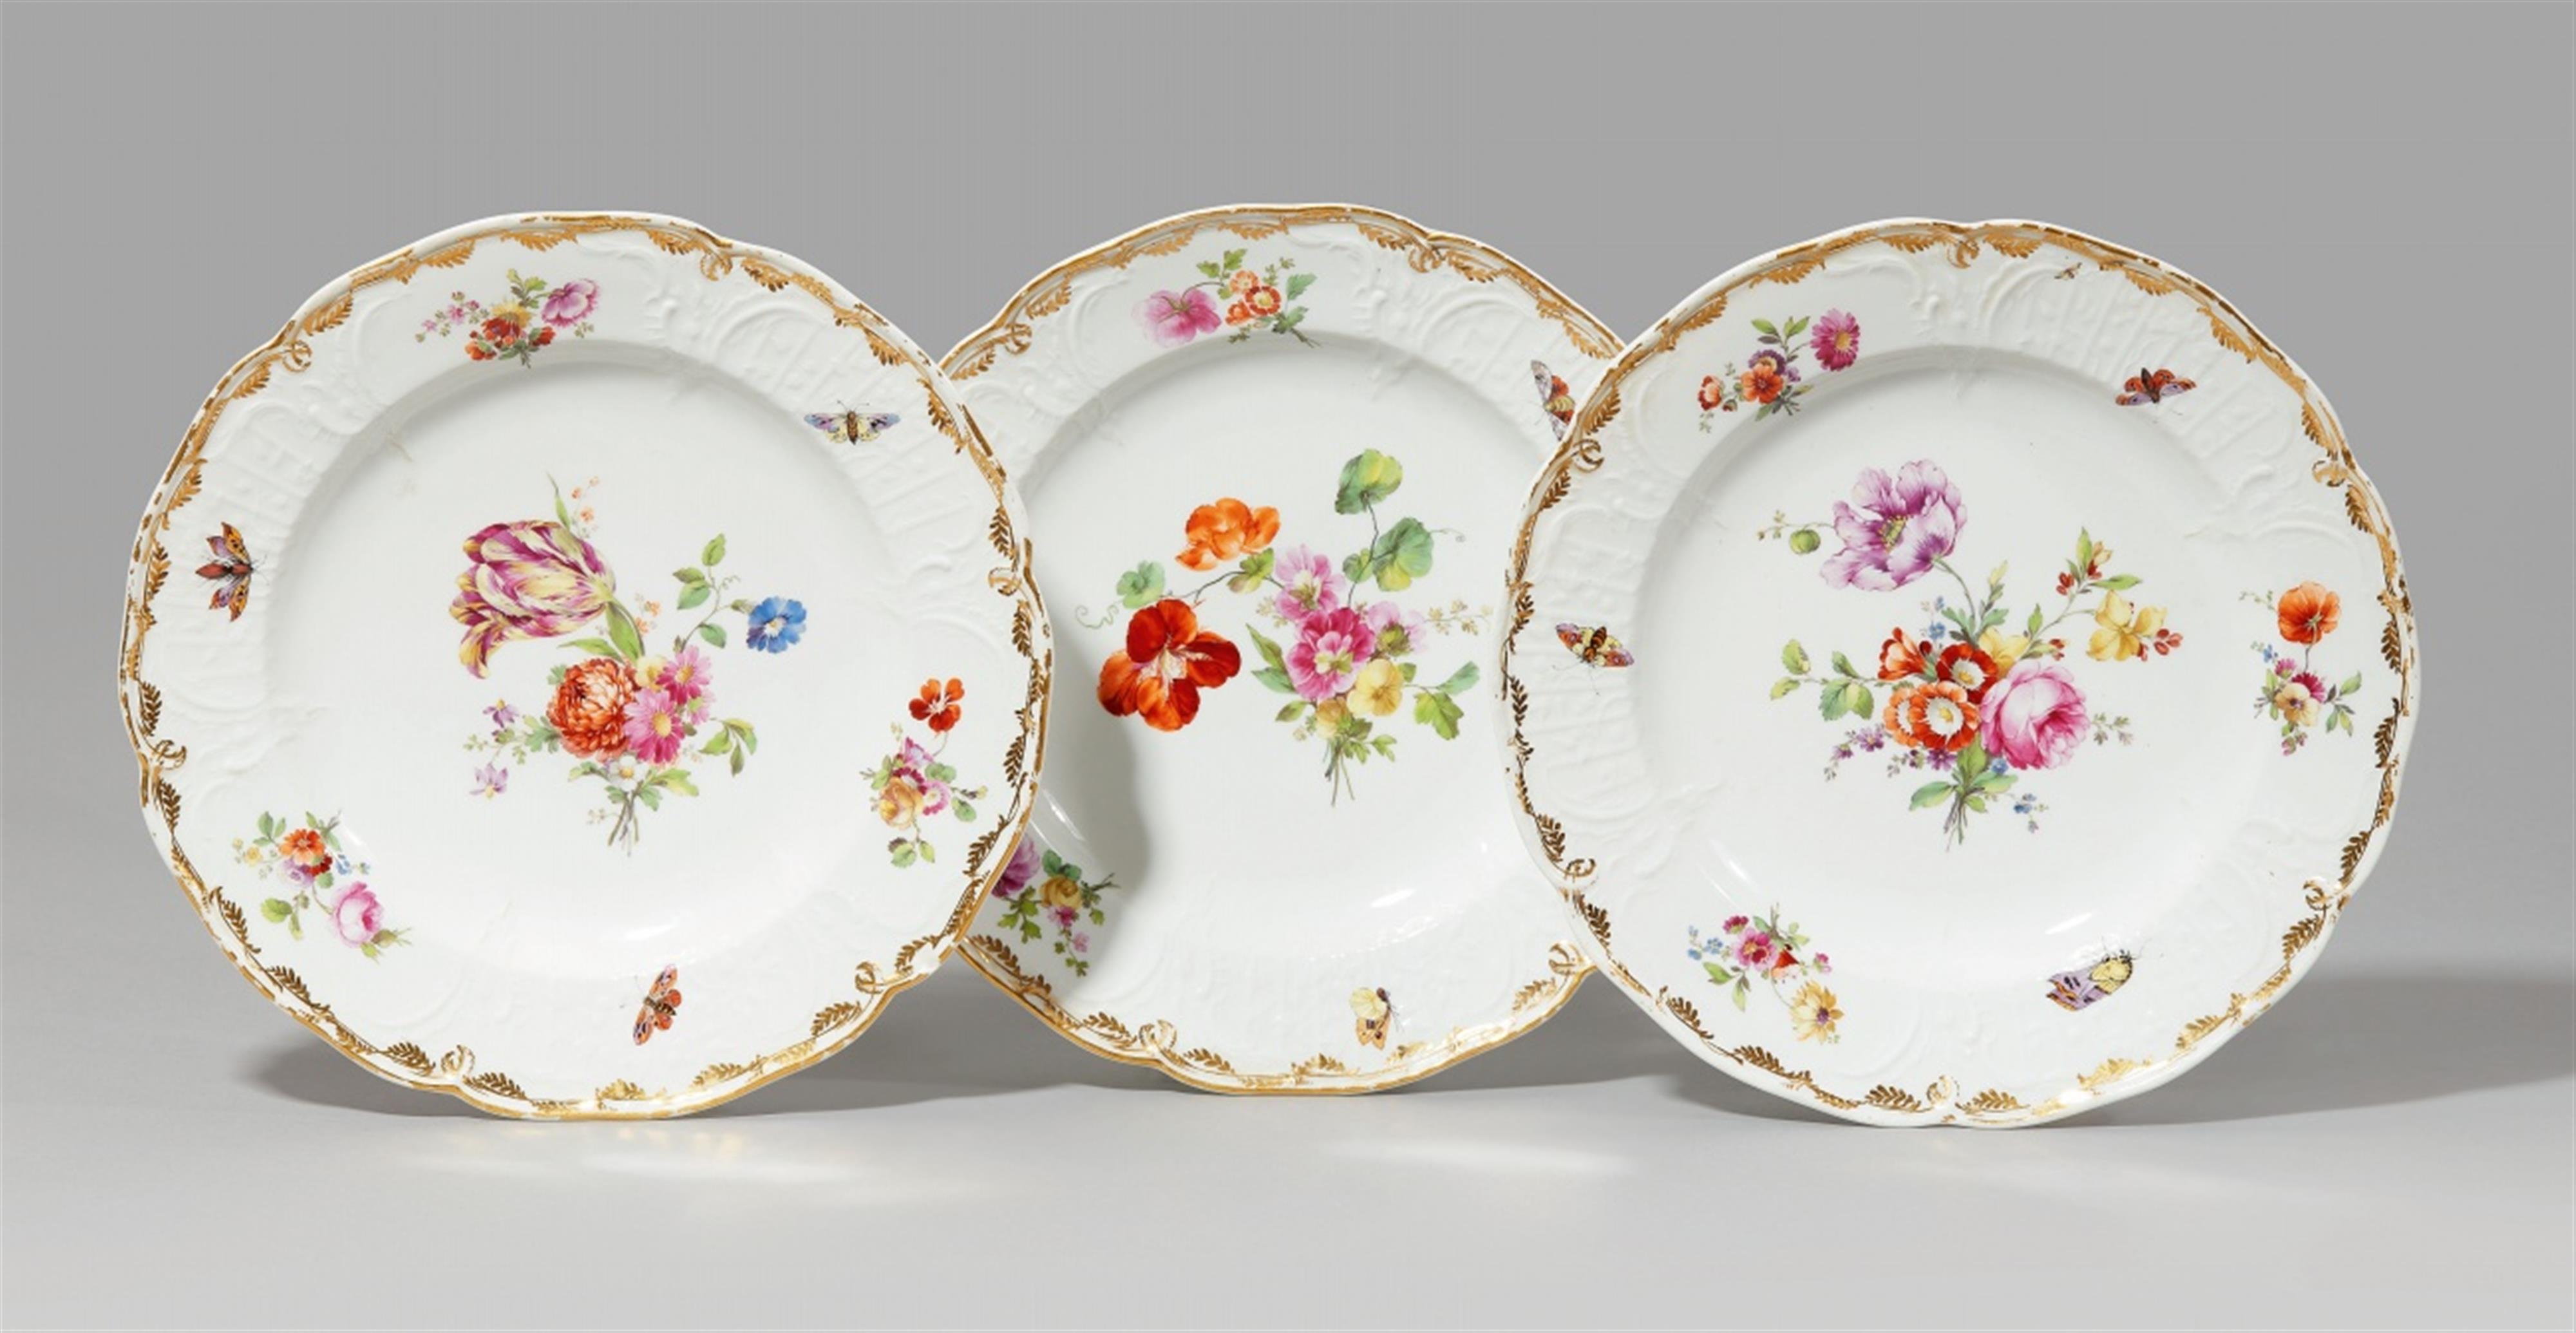 Three Berlin KPM porcelain dinner plates from the second order of the dinner service for Berlin Palace - image-1